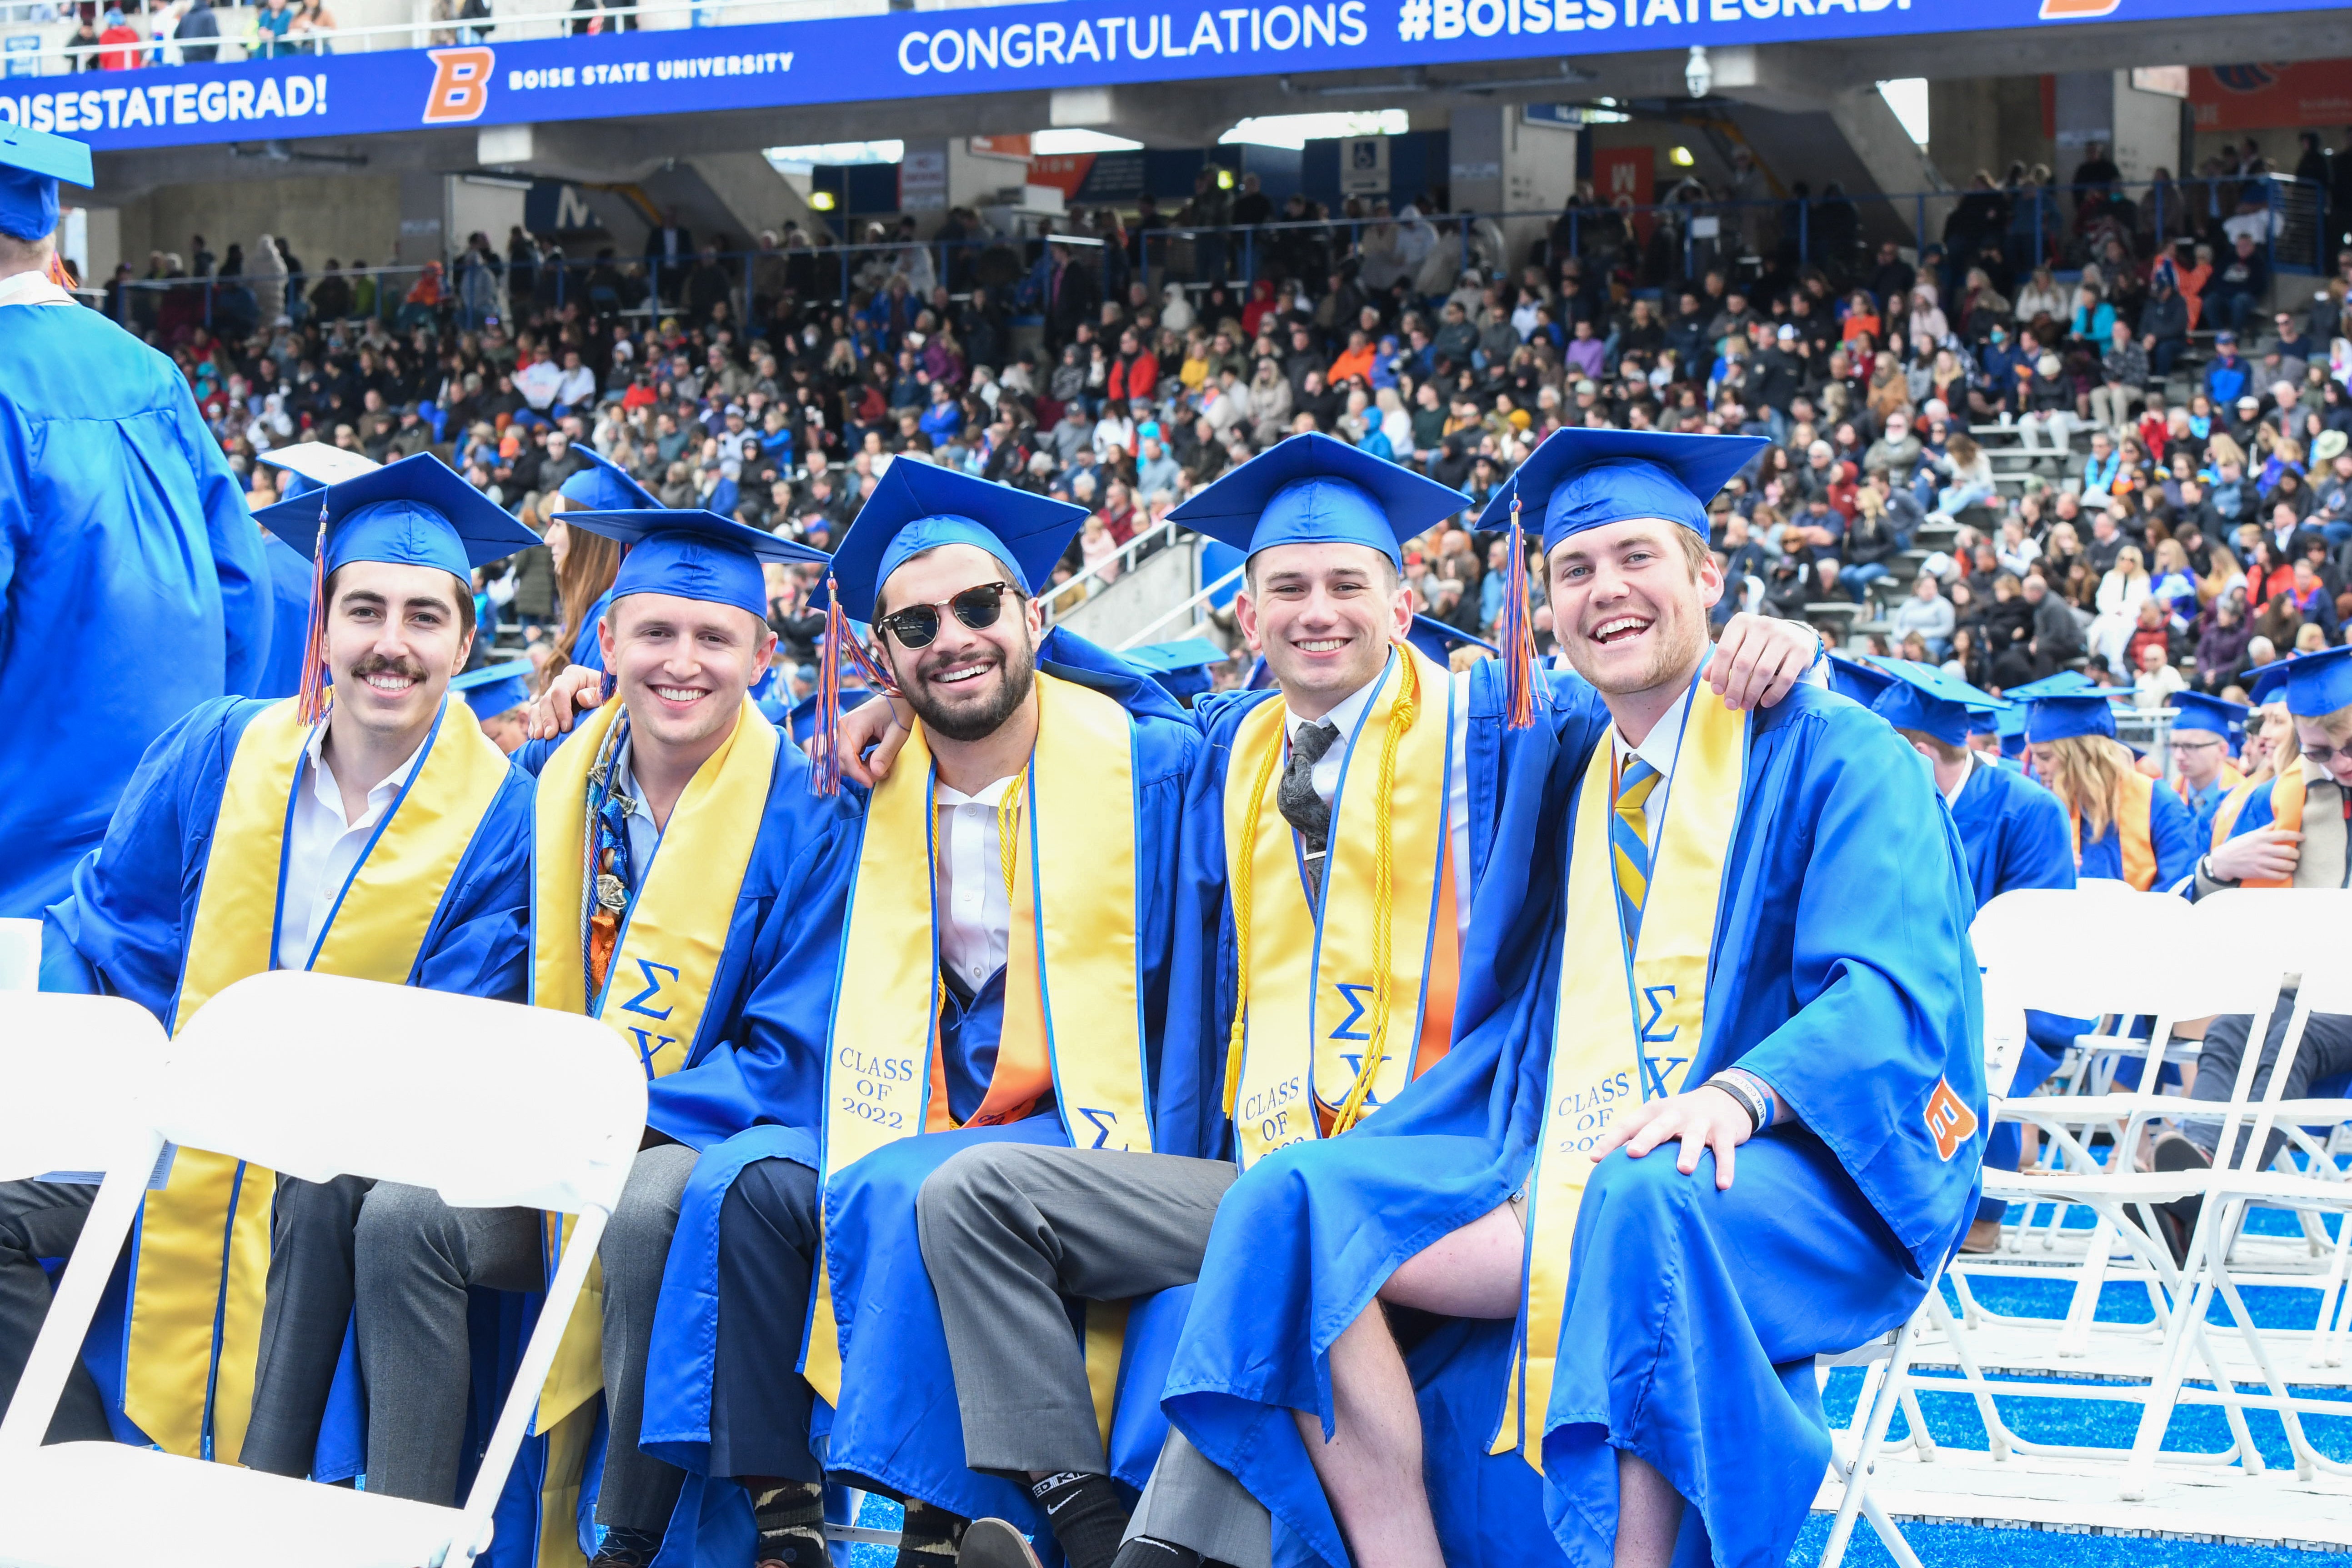 group of students sit together at commencement